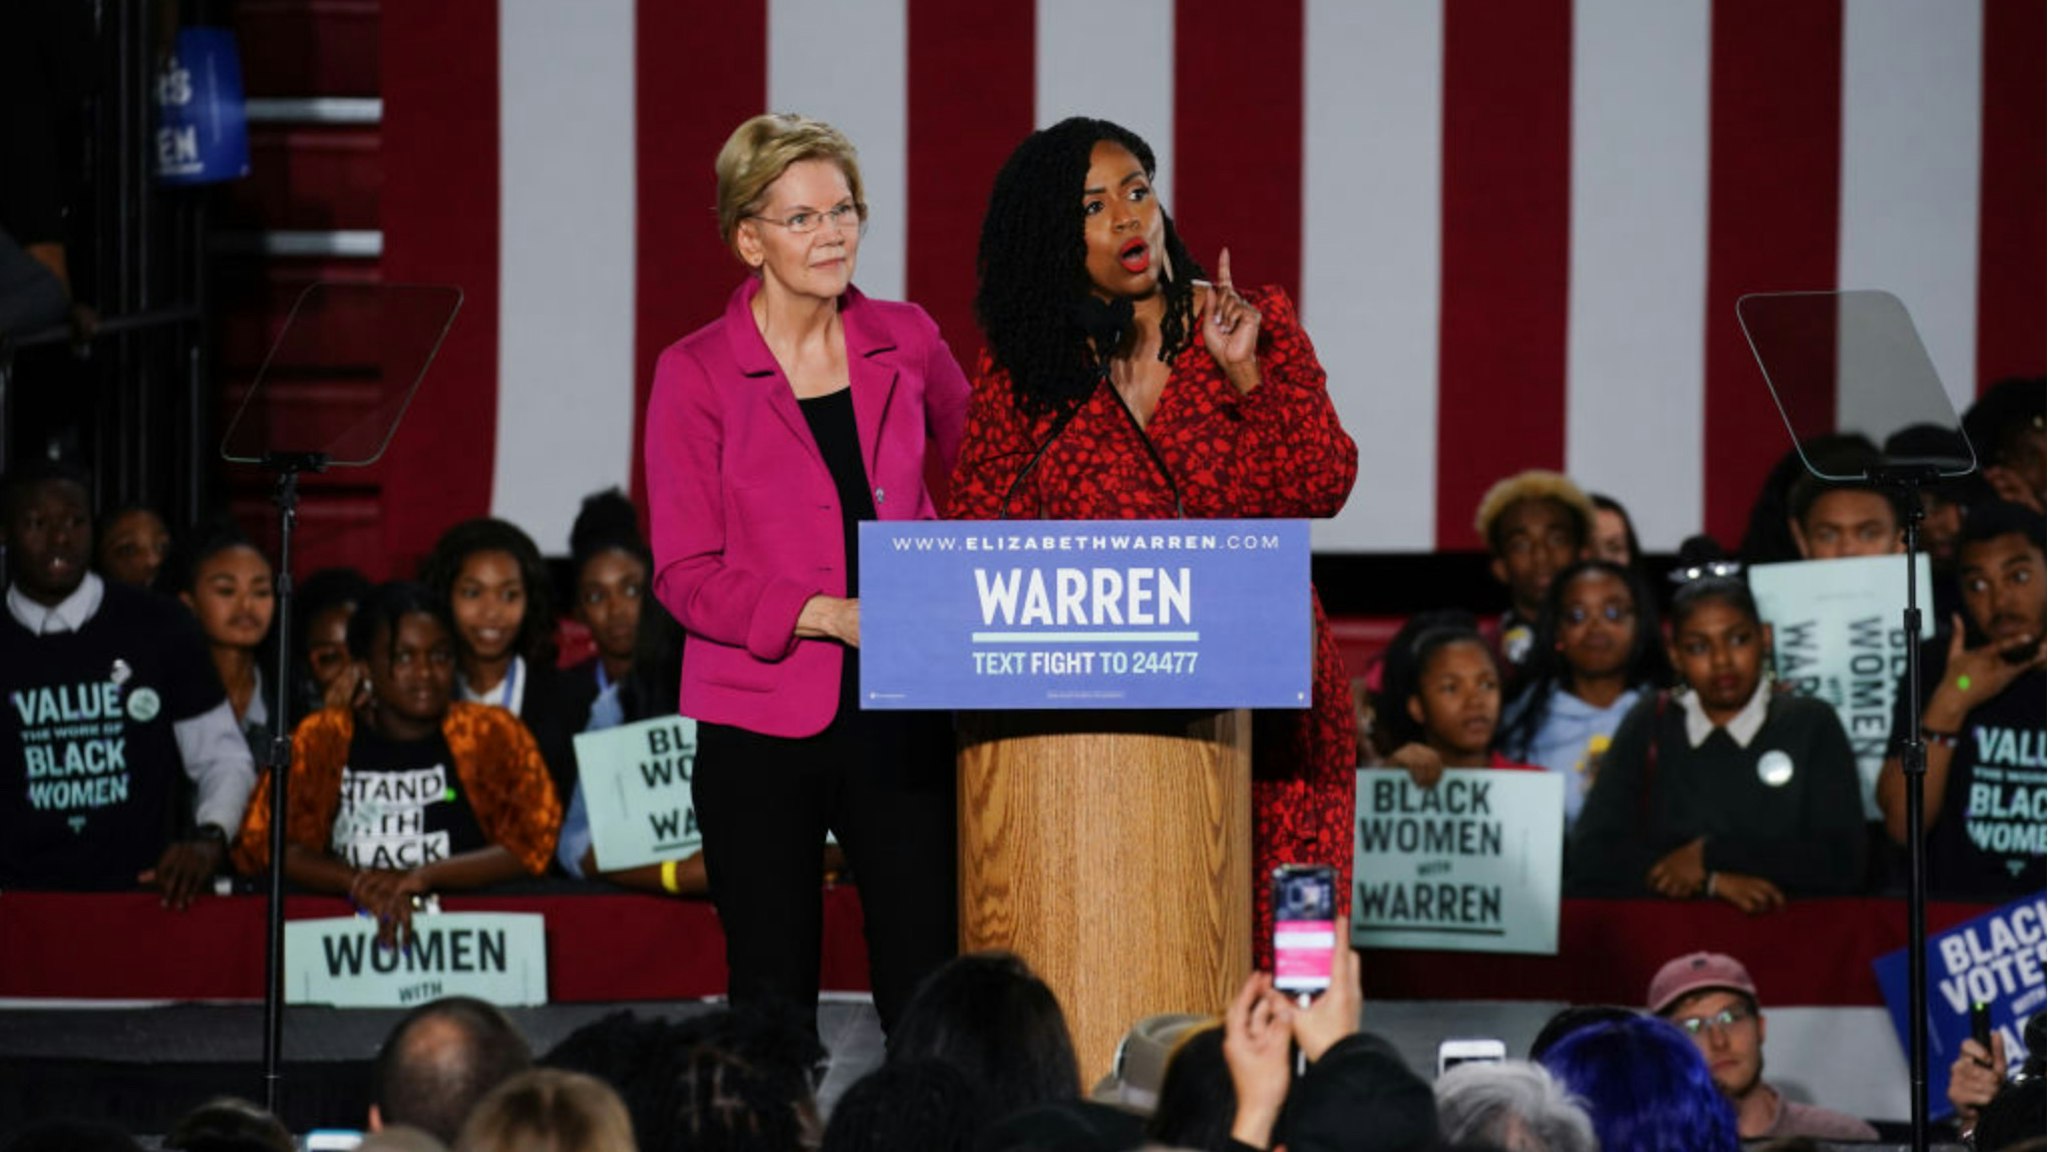 Democratic presidential candidate Sen. Elizabeth Warren (D-MA), stands with U.S. Rep. Ayanna Pressley (D-MA) as she addresses a group of protesters during a campaign event at Clark Atlanta University on November 21, 2019 in Atlanta, Georgia.